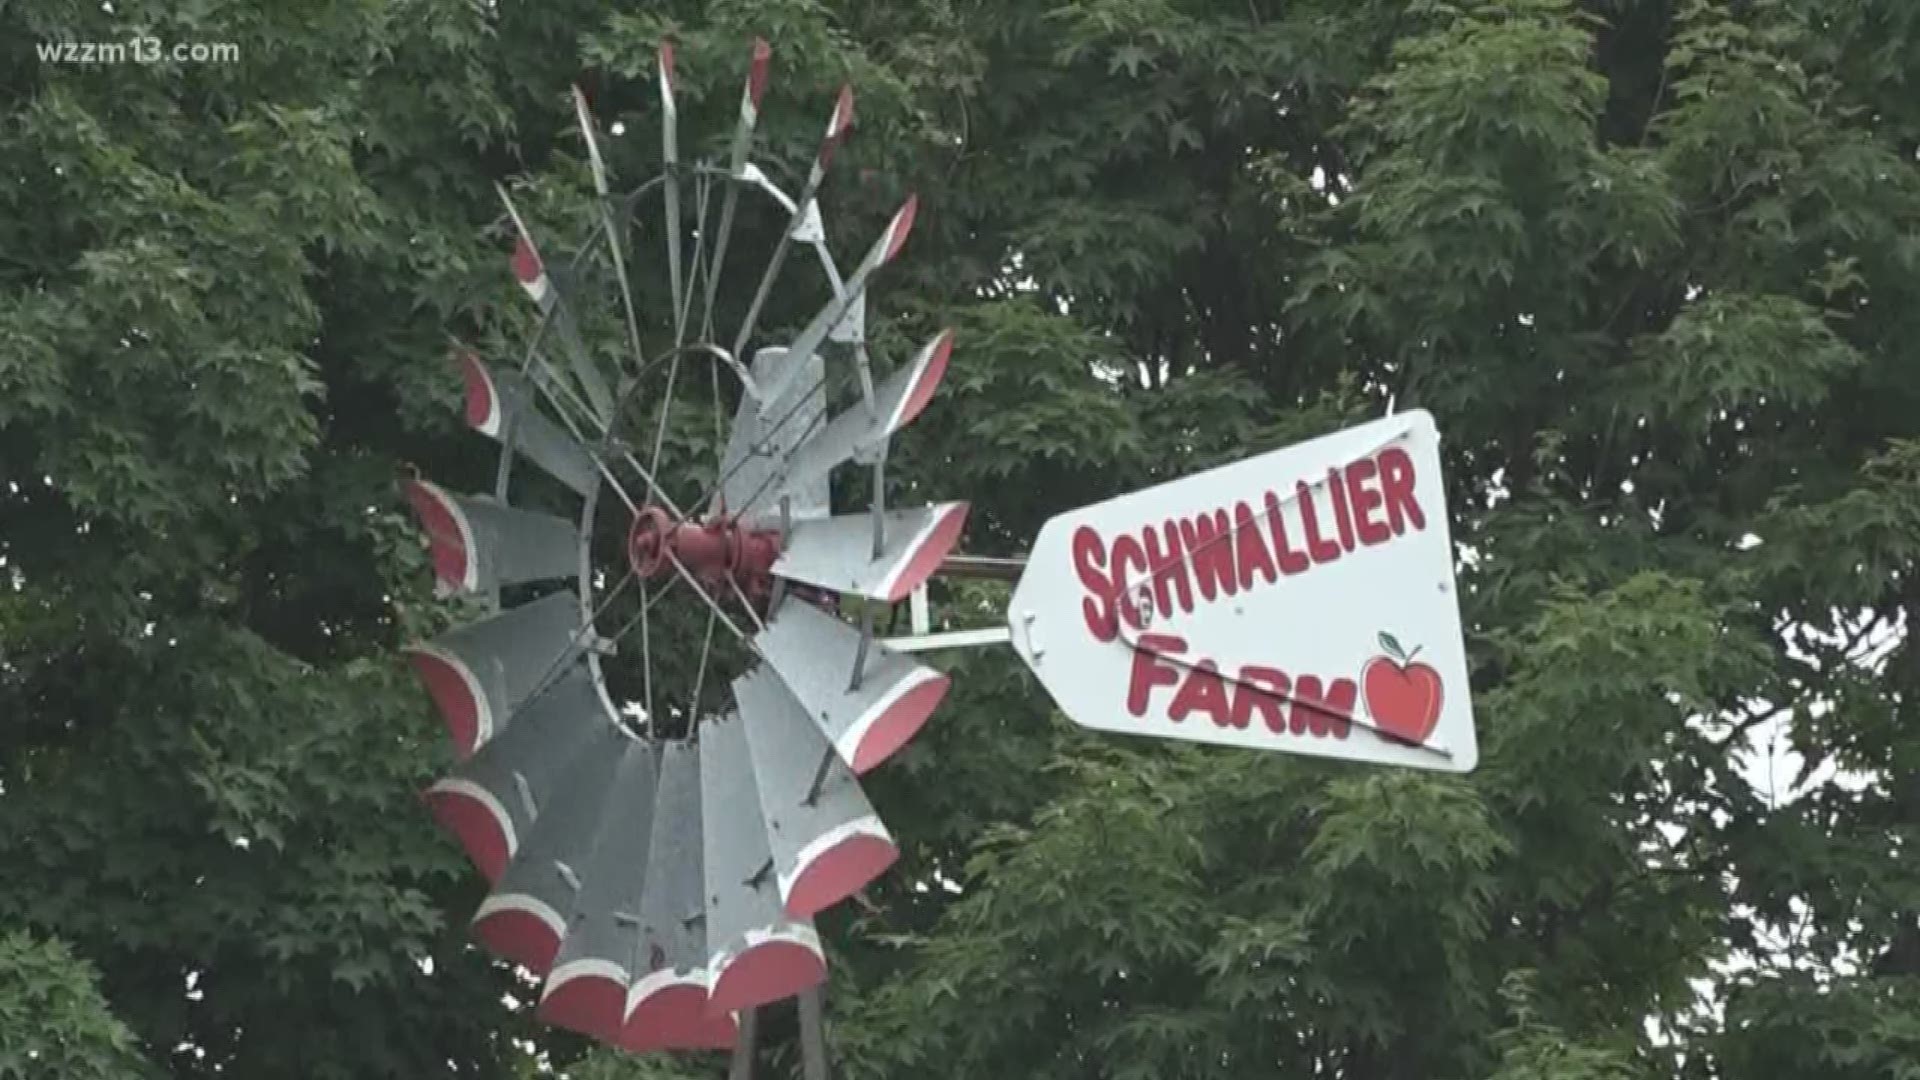 Schwalliers opens for the season